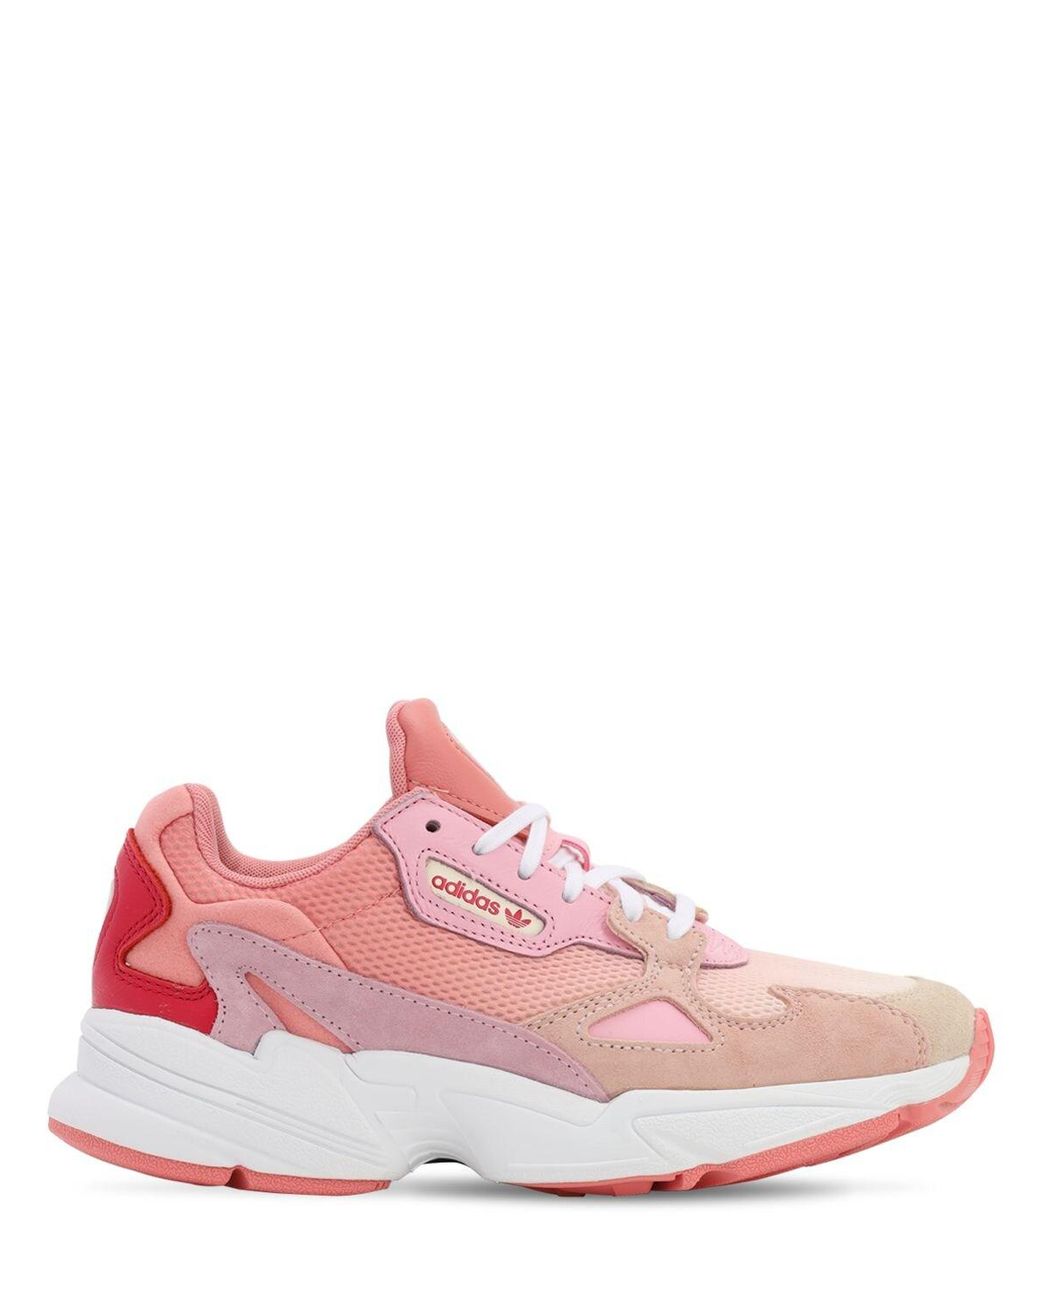 adidas Originals Leather Falcon in Peach/Peach (Pink) - Save 57% | Lyst